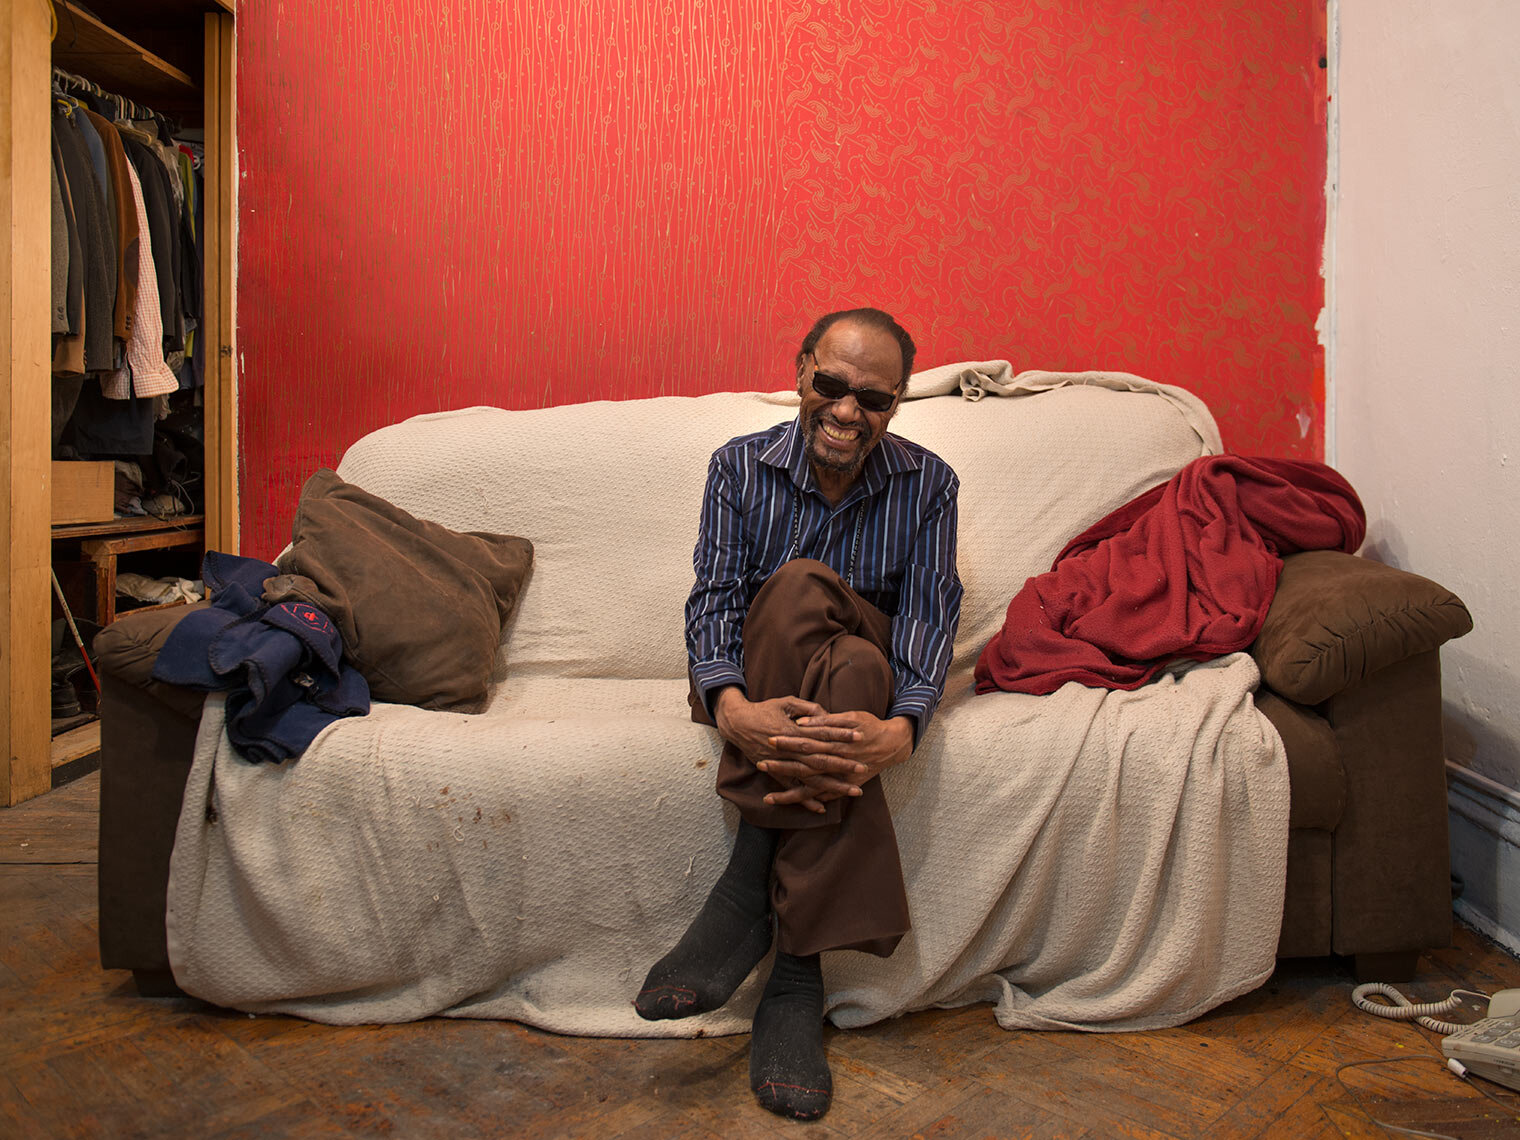 Steve cannon on covered couch with wall during eviction move out.jpg